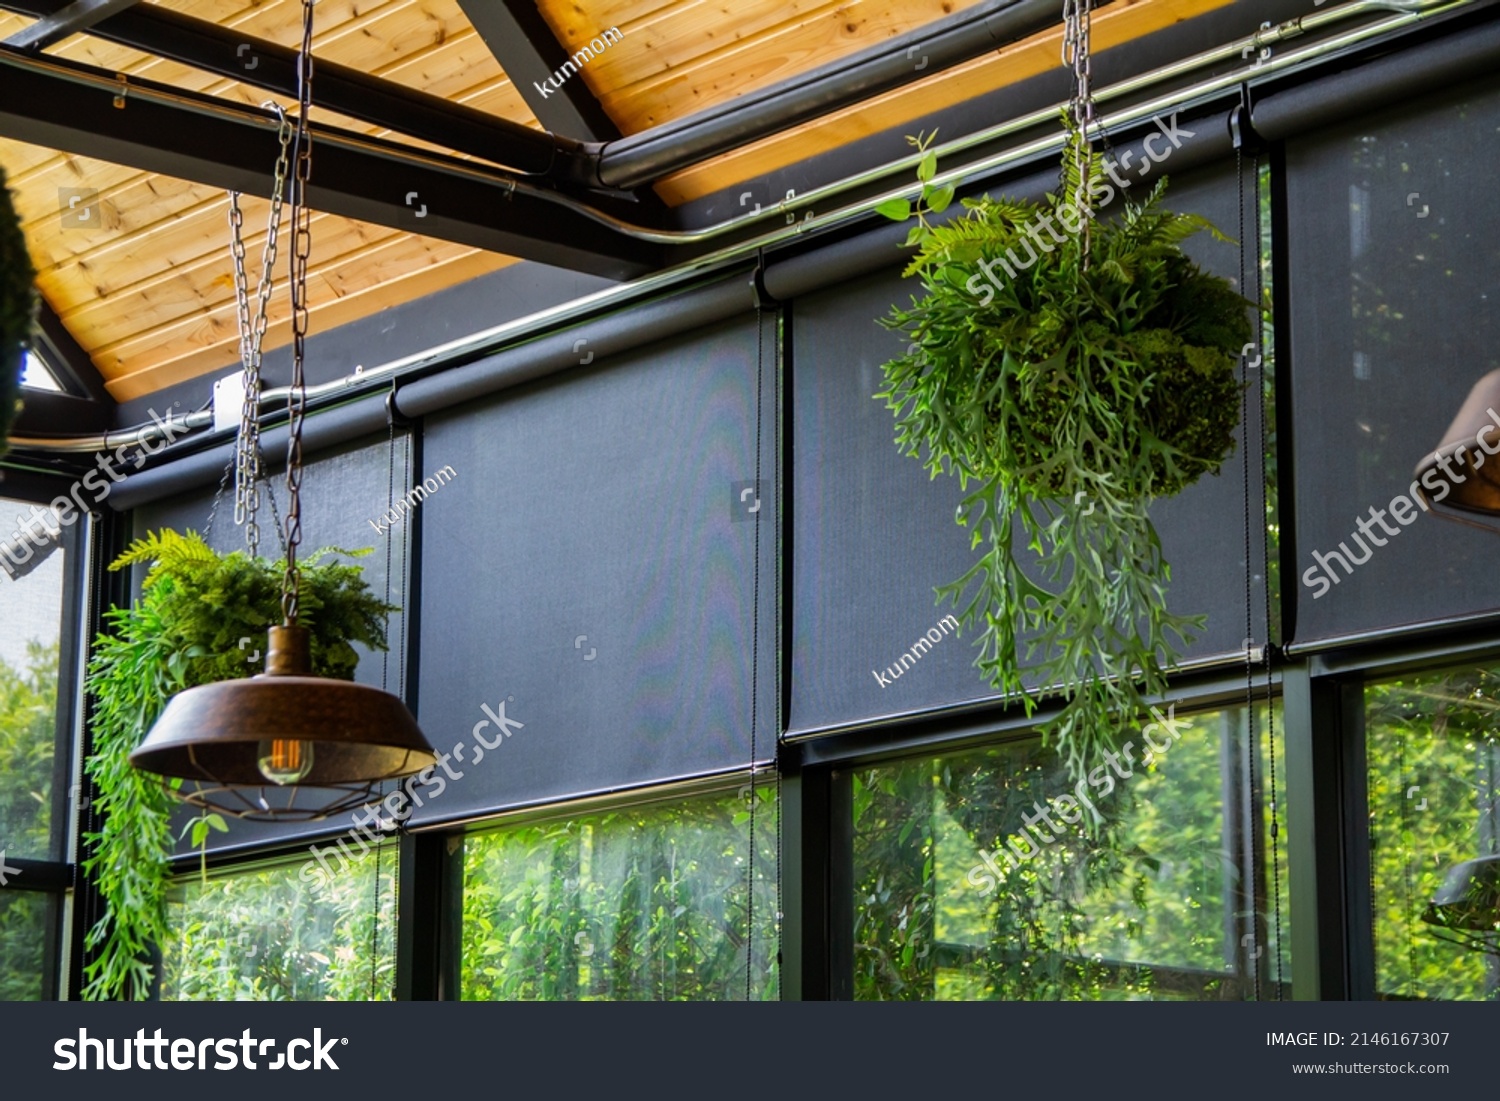 Black roller blind or curtains on the glass wall, Interior design with hanging green ferns. #2146167307